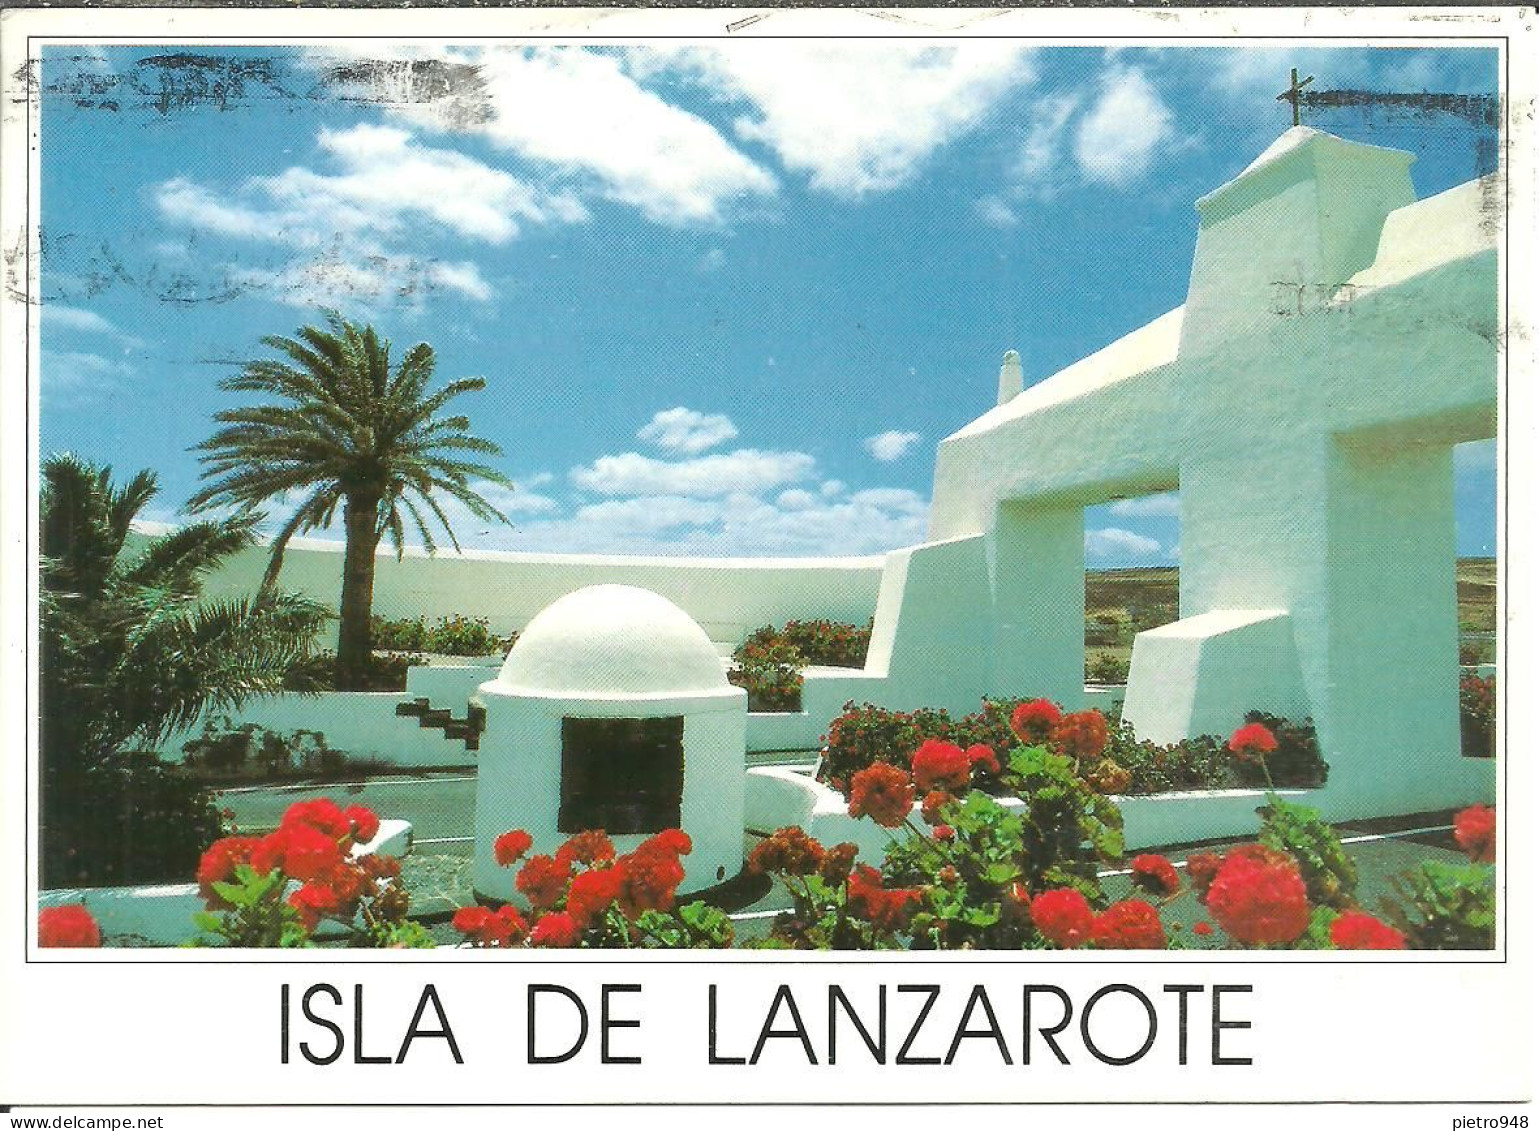 Lanzarote (Canarie, Spagna) Arquitectura Tipica, Colores Blanco Y Verde, Typical Architecture With White And Green - Lanzarote